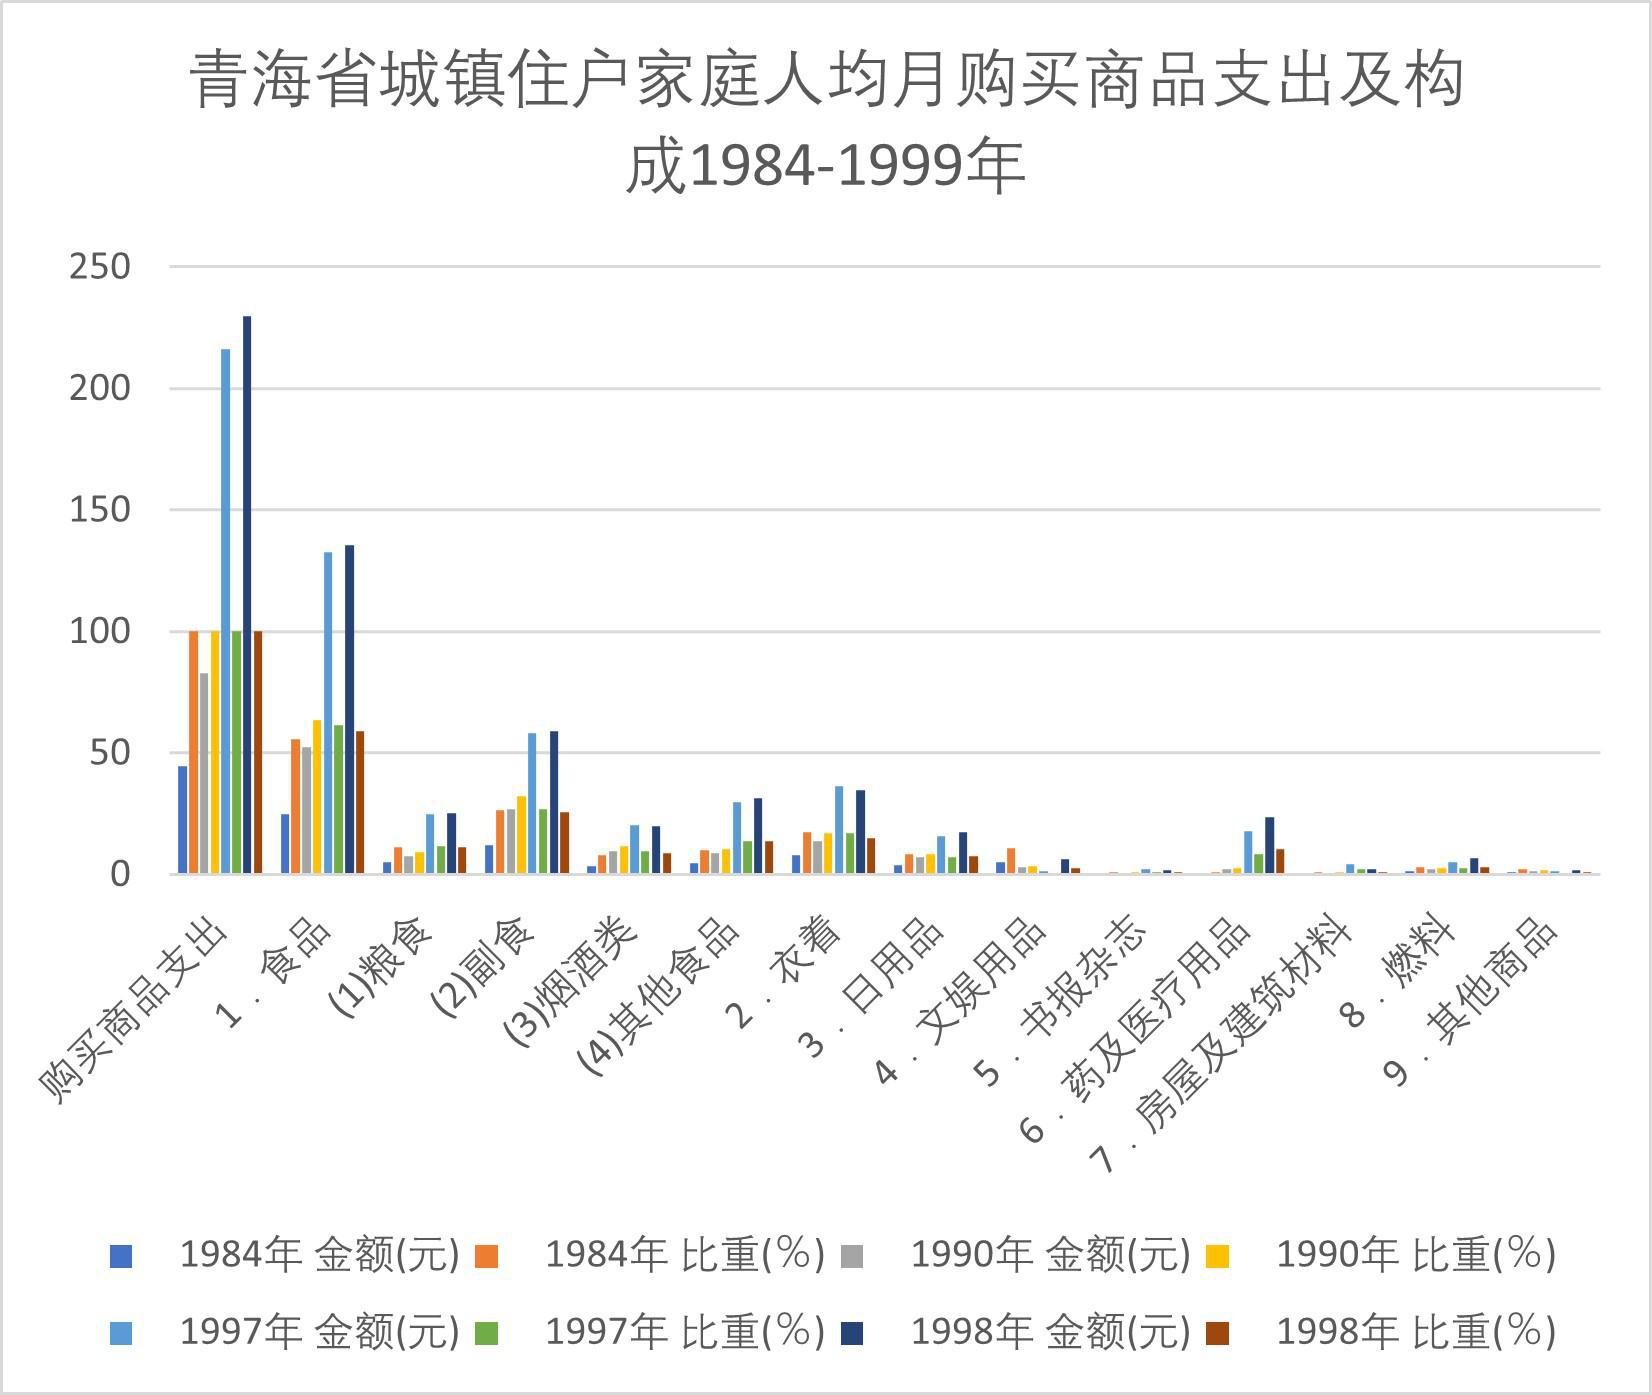 Per capita monthly expenditure on commodity purchase and its composition of urban households in Qinghai Province (1984-1999)